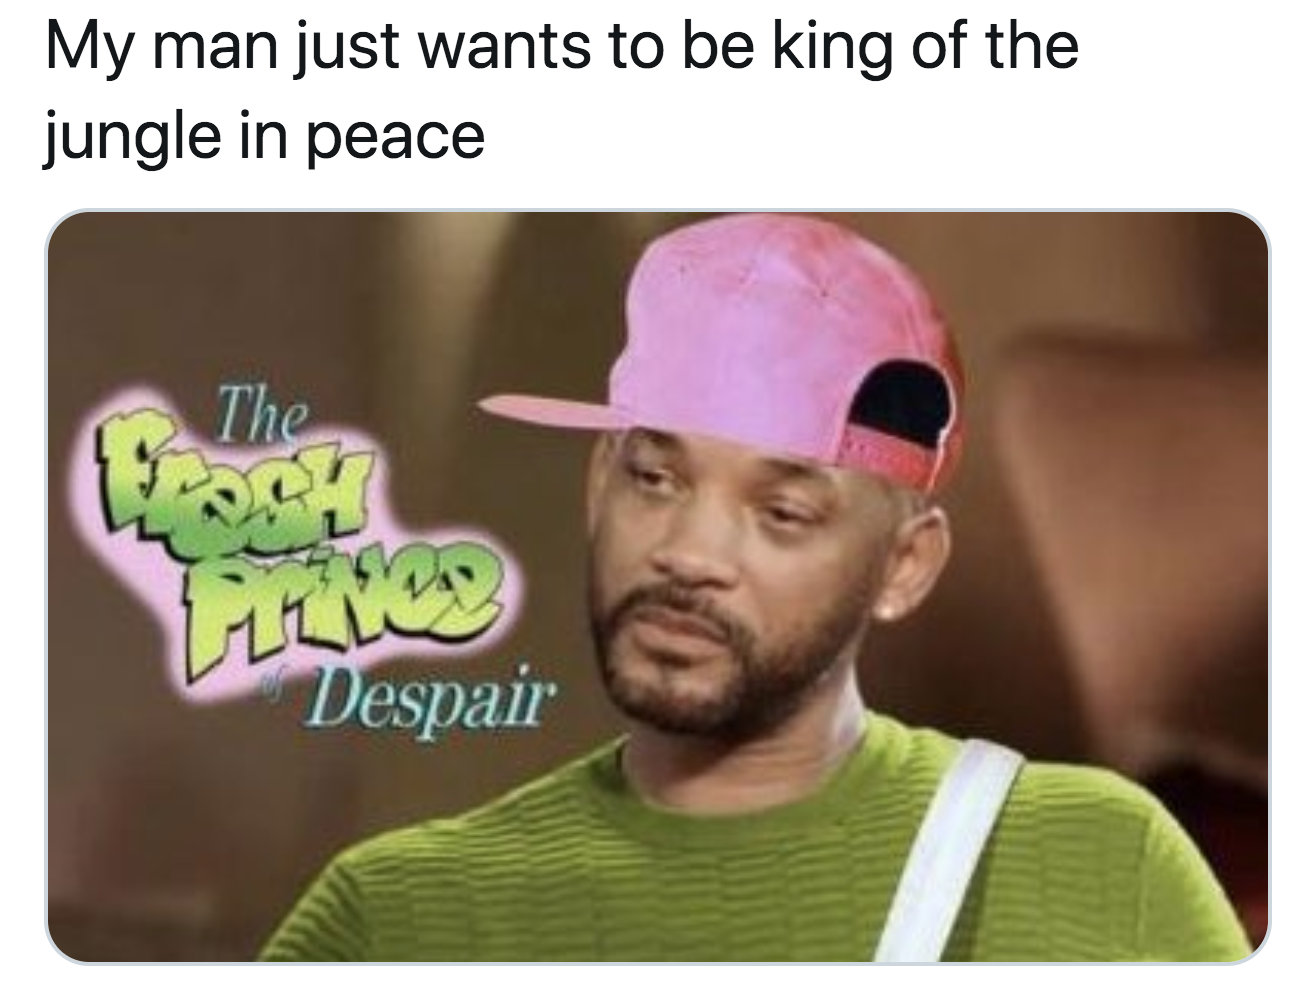 fresh prince of bel air - My man just wants to be king of the jungle in peace The Despair